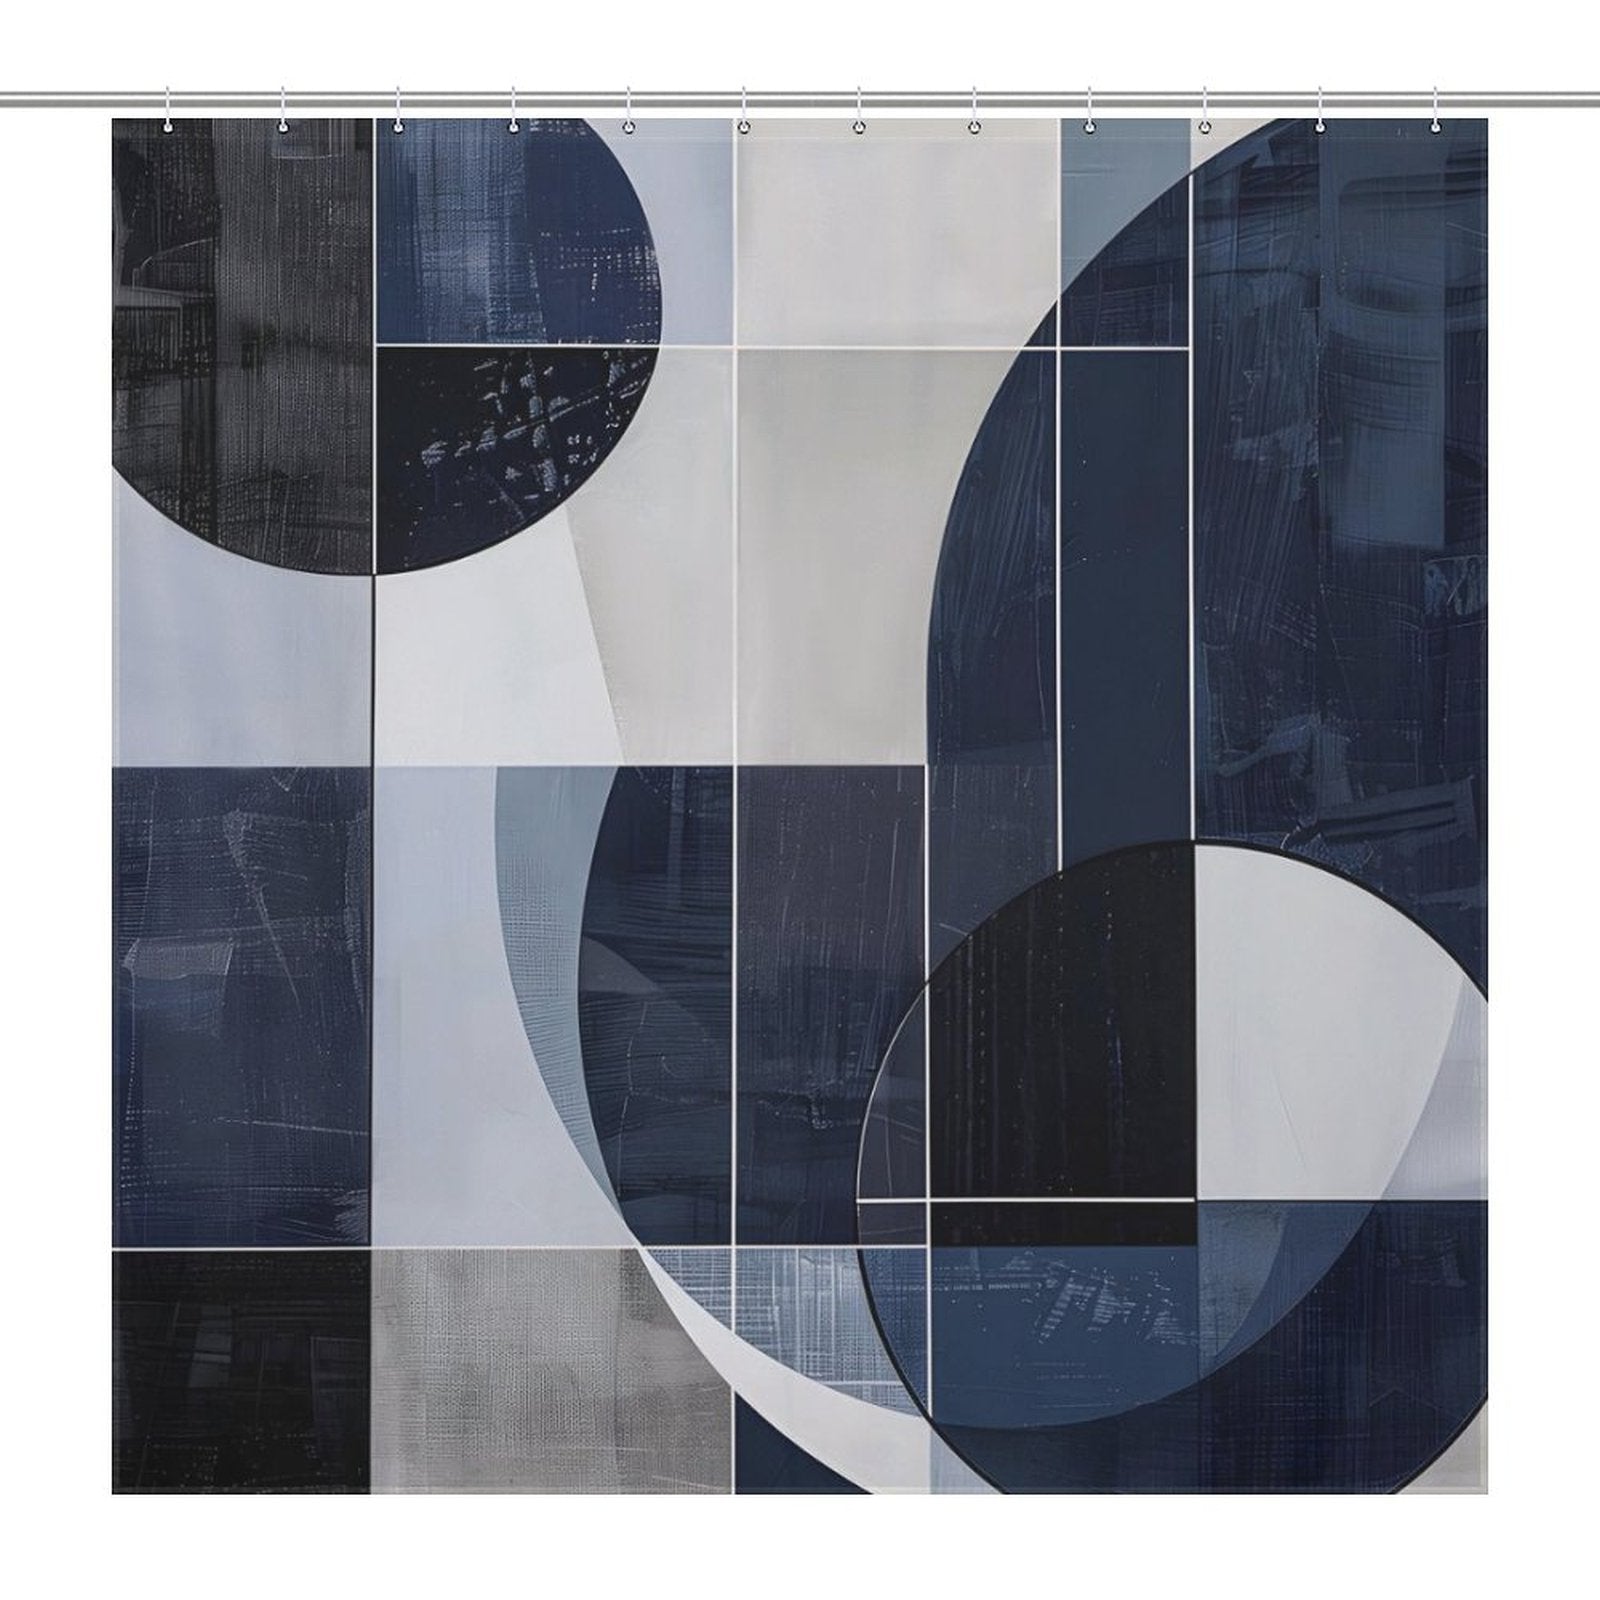 A Cotton Cat Geometric Deep Blue Abstract Art Mid-Century Modern Style Shower Curtain-Cottoncat, featuring intersecting rectangles and circles that evoke a mid-century modern aesthetic.